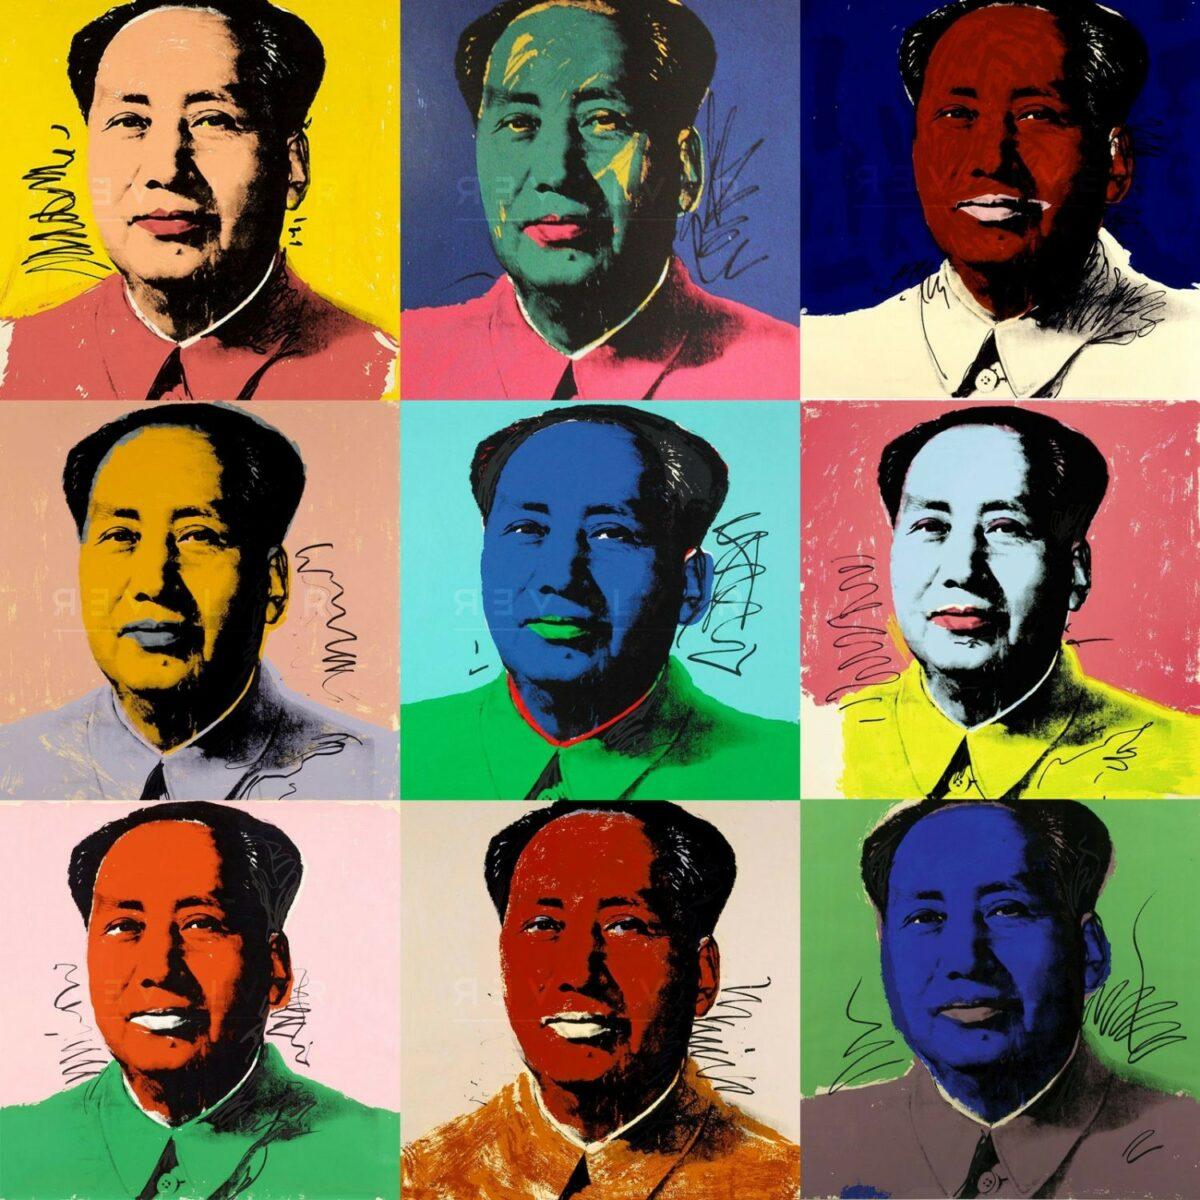 Title: Mao Complete Portfolio
Medium: Screenprint on Beckett High White Paper.
Year: 1972
Size: 36″ x 36″

Details: Edition of 250 signed in ball-point pen and numbered with a rubber stamp on verso. There are 50 AP singed and numbered in pencil on